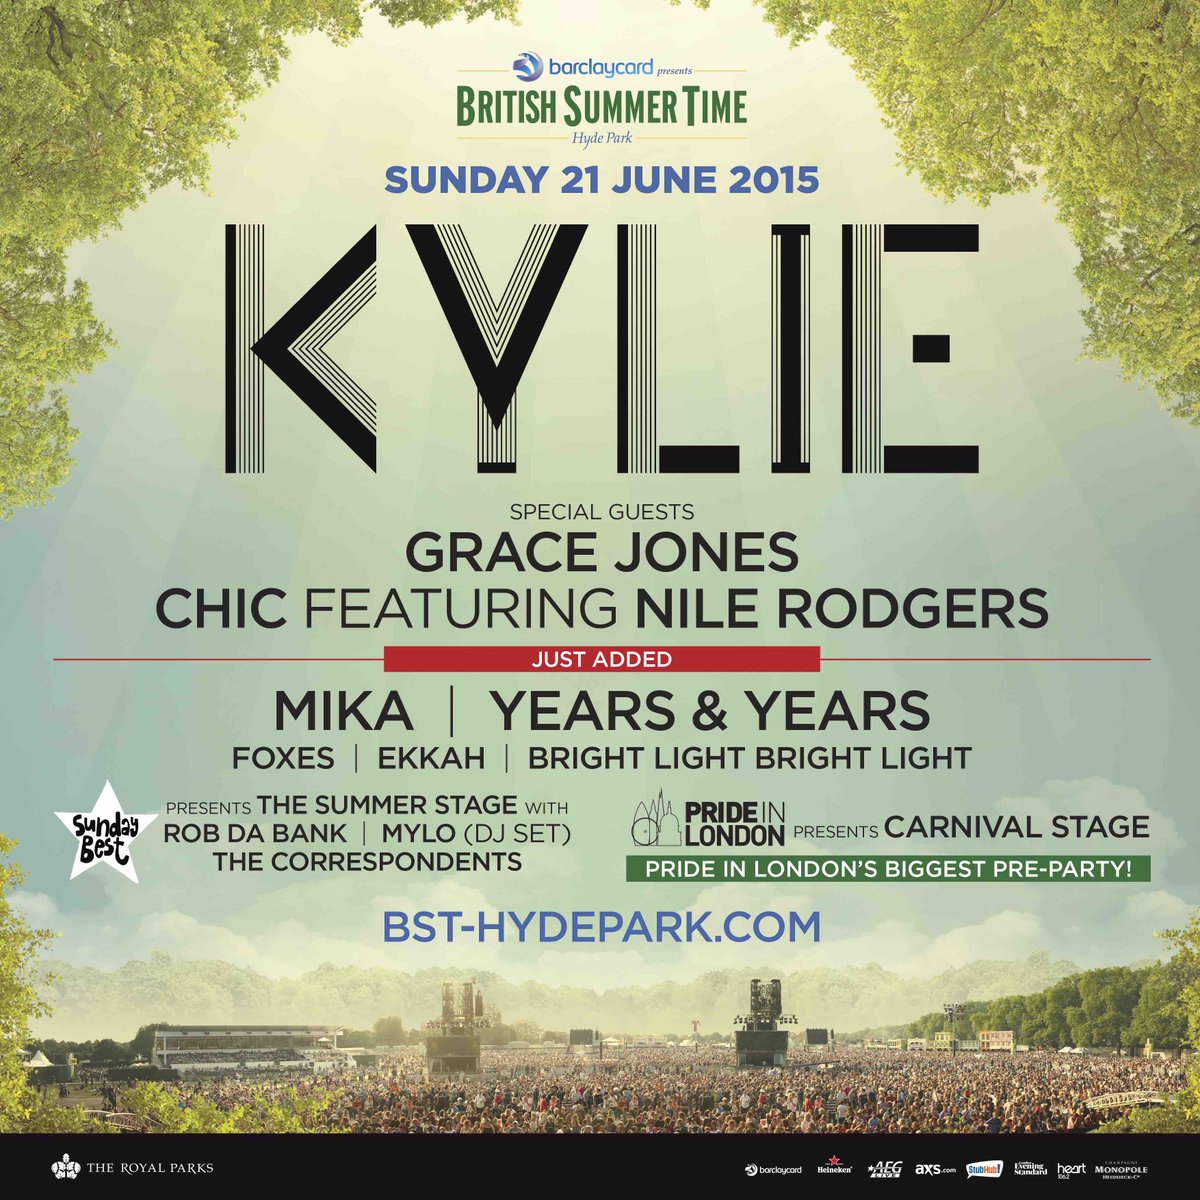 RT @LondonLGBTPride: Congratulations to @KieranWatkins, Liz and Anthony who won our competition to see @kylieminogue at @BSTHydePark! http:…